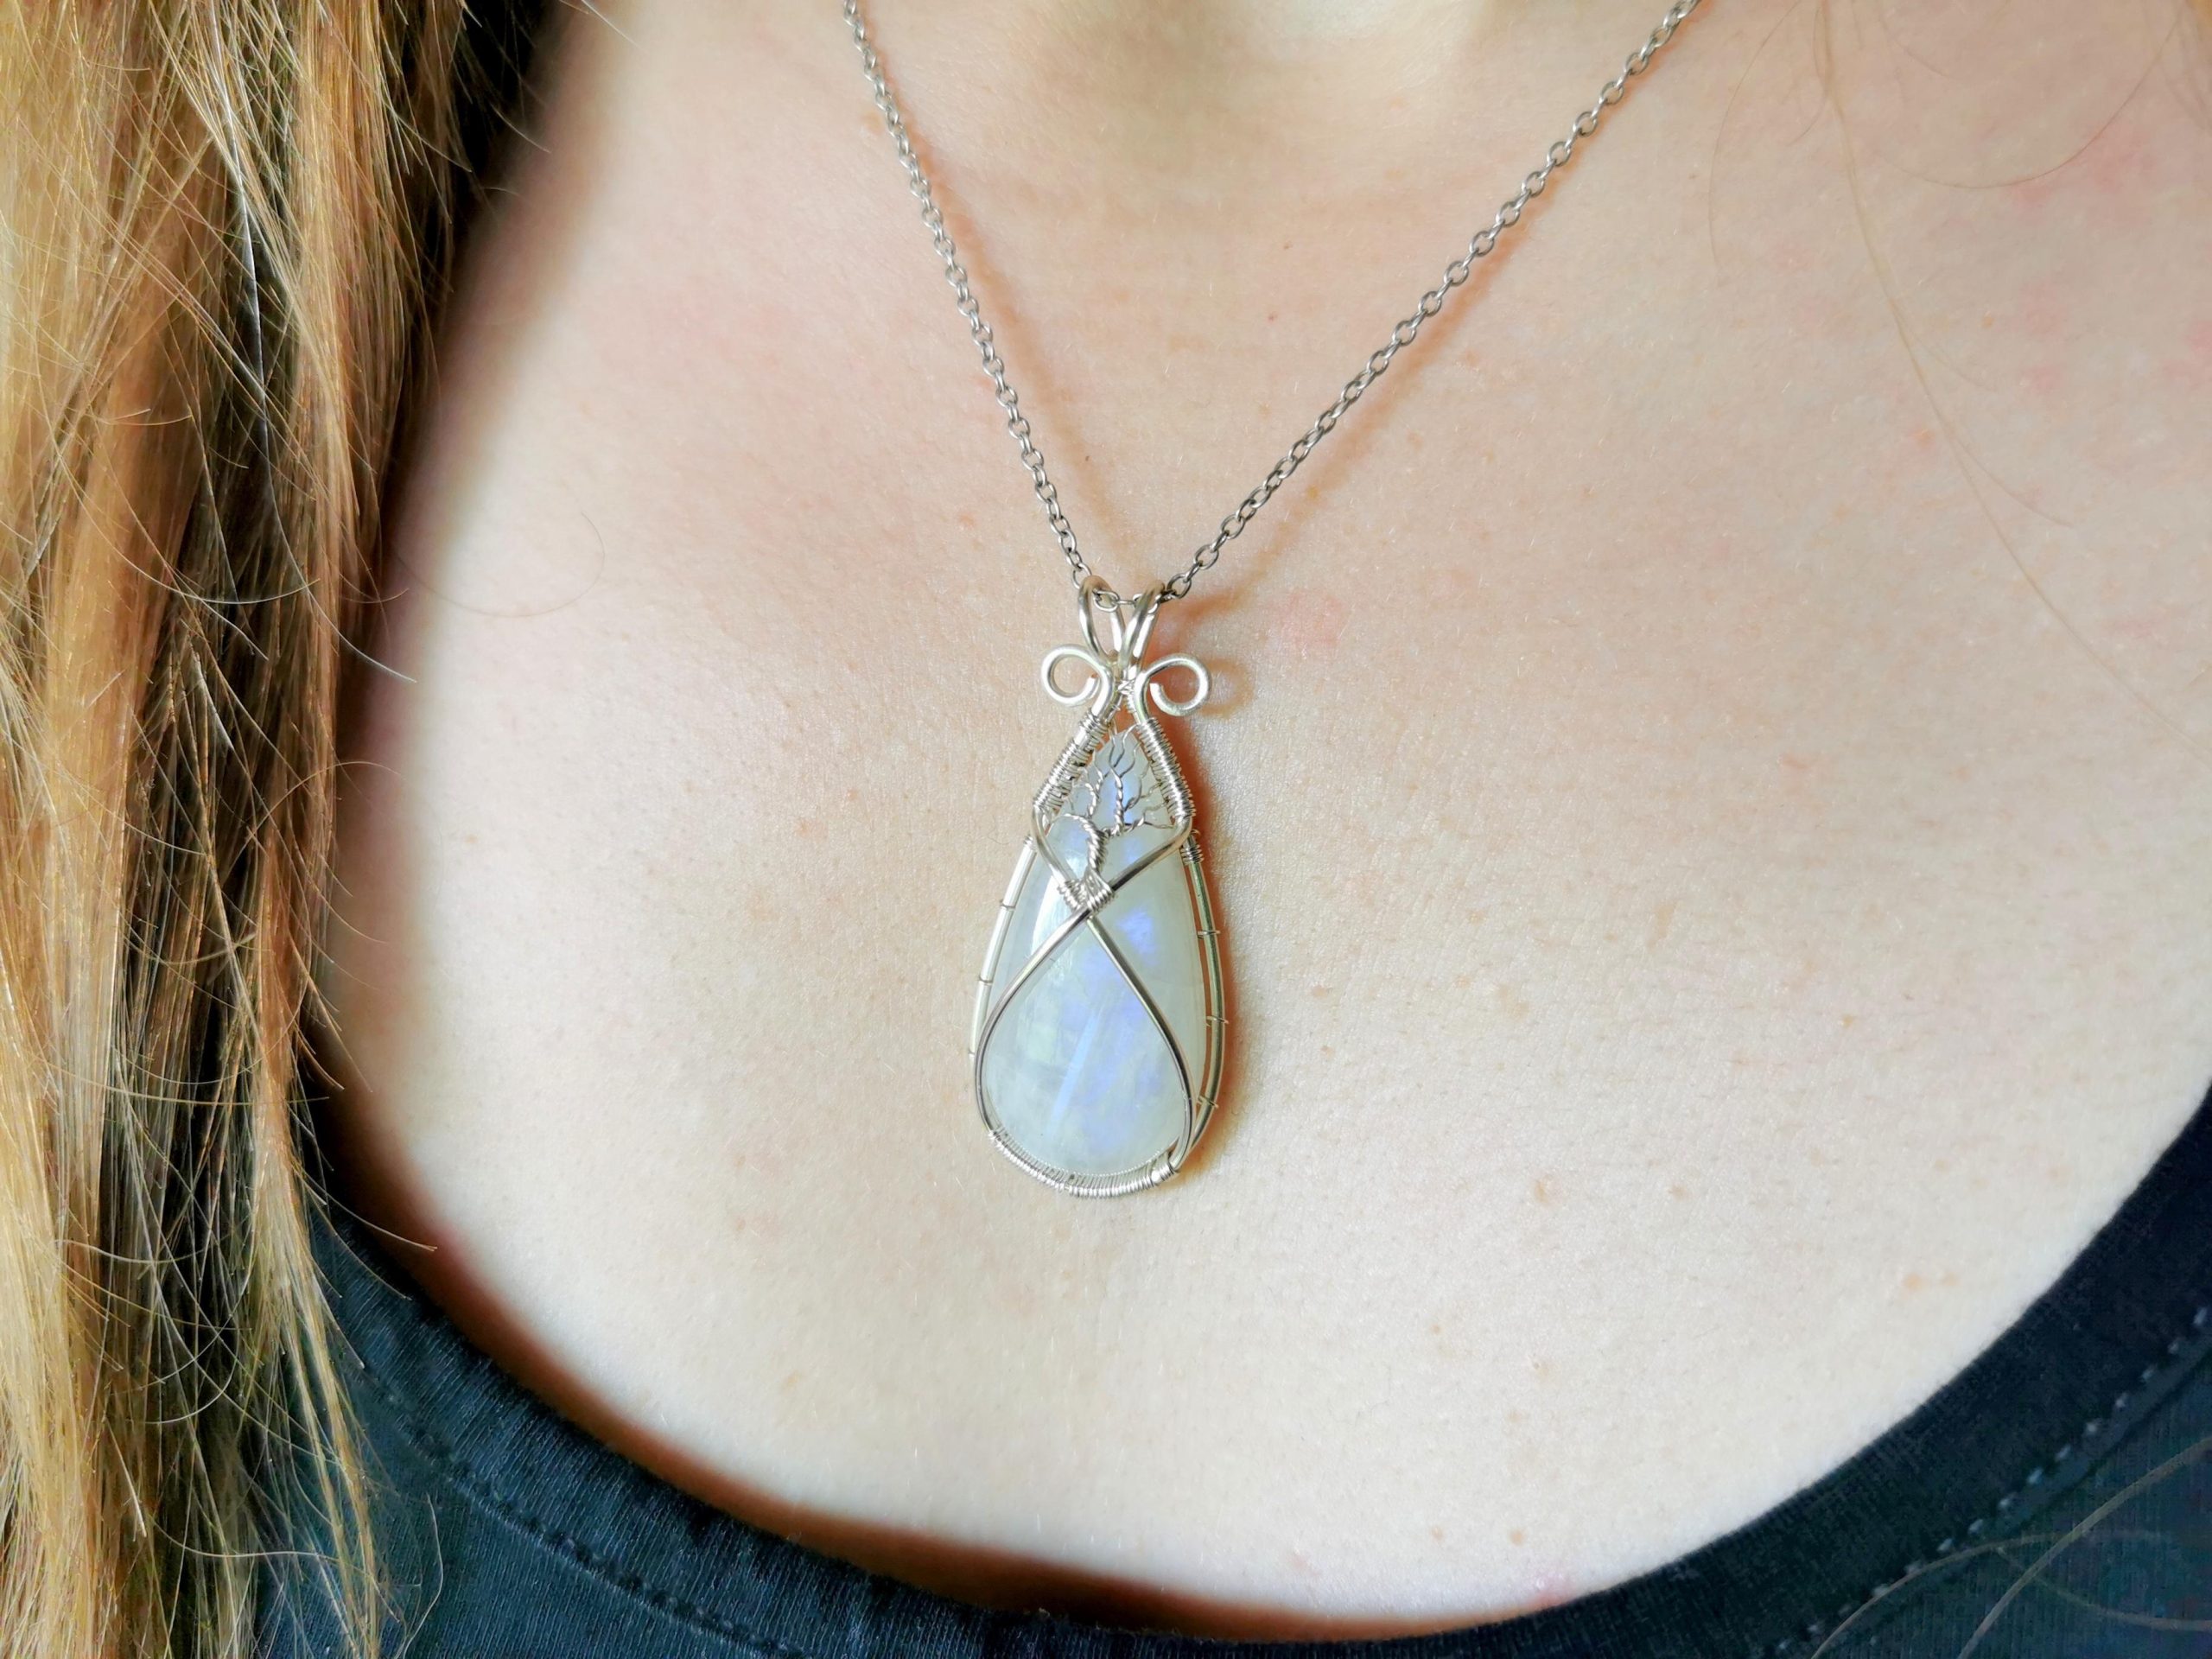 I made a tree pendant with a moonstone.